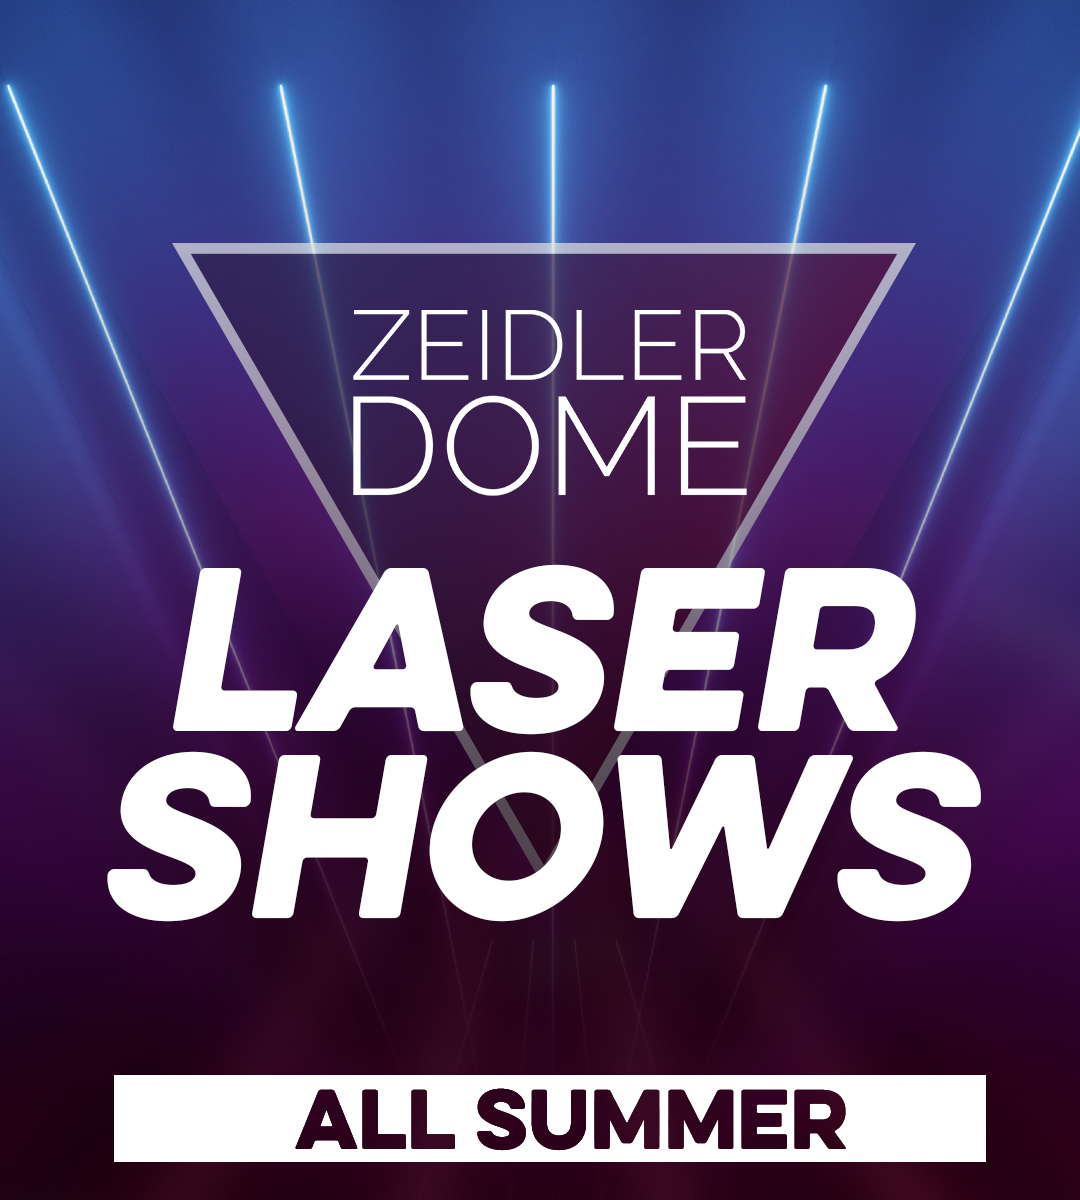 Summer Laser Shows in the Zeidler Dome - image